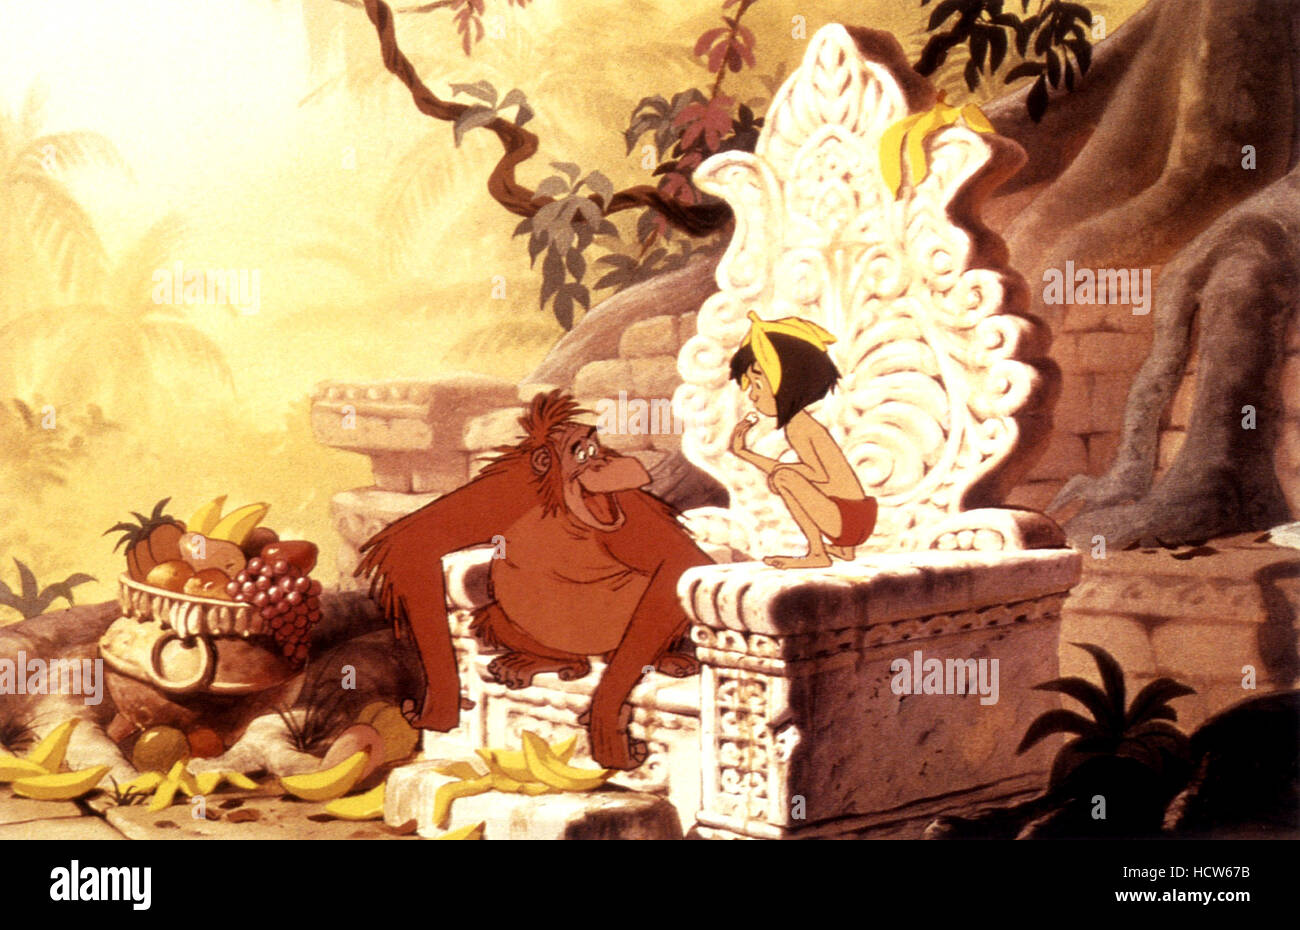 THE JUNGLE BOOK, 1967, (c)Walt Disney Pictures/Courtesy: Everett Collection Stock Photo